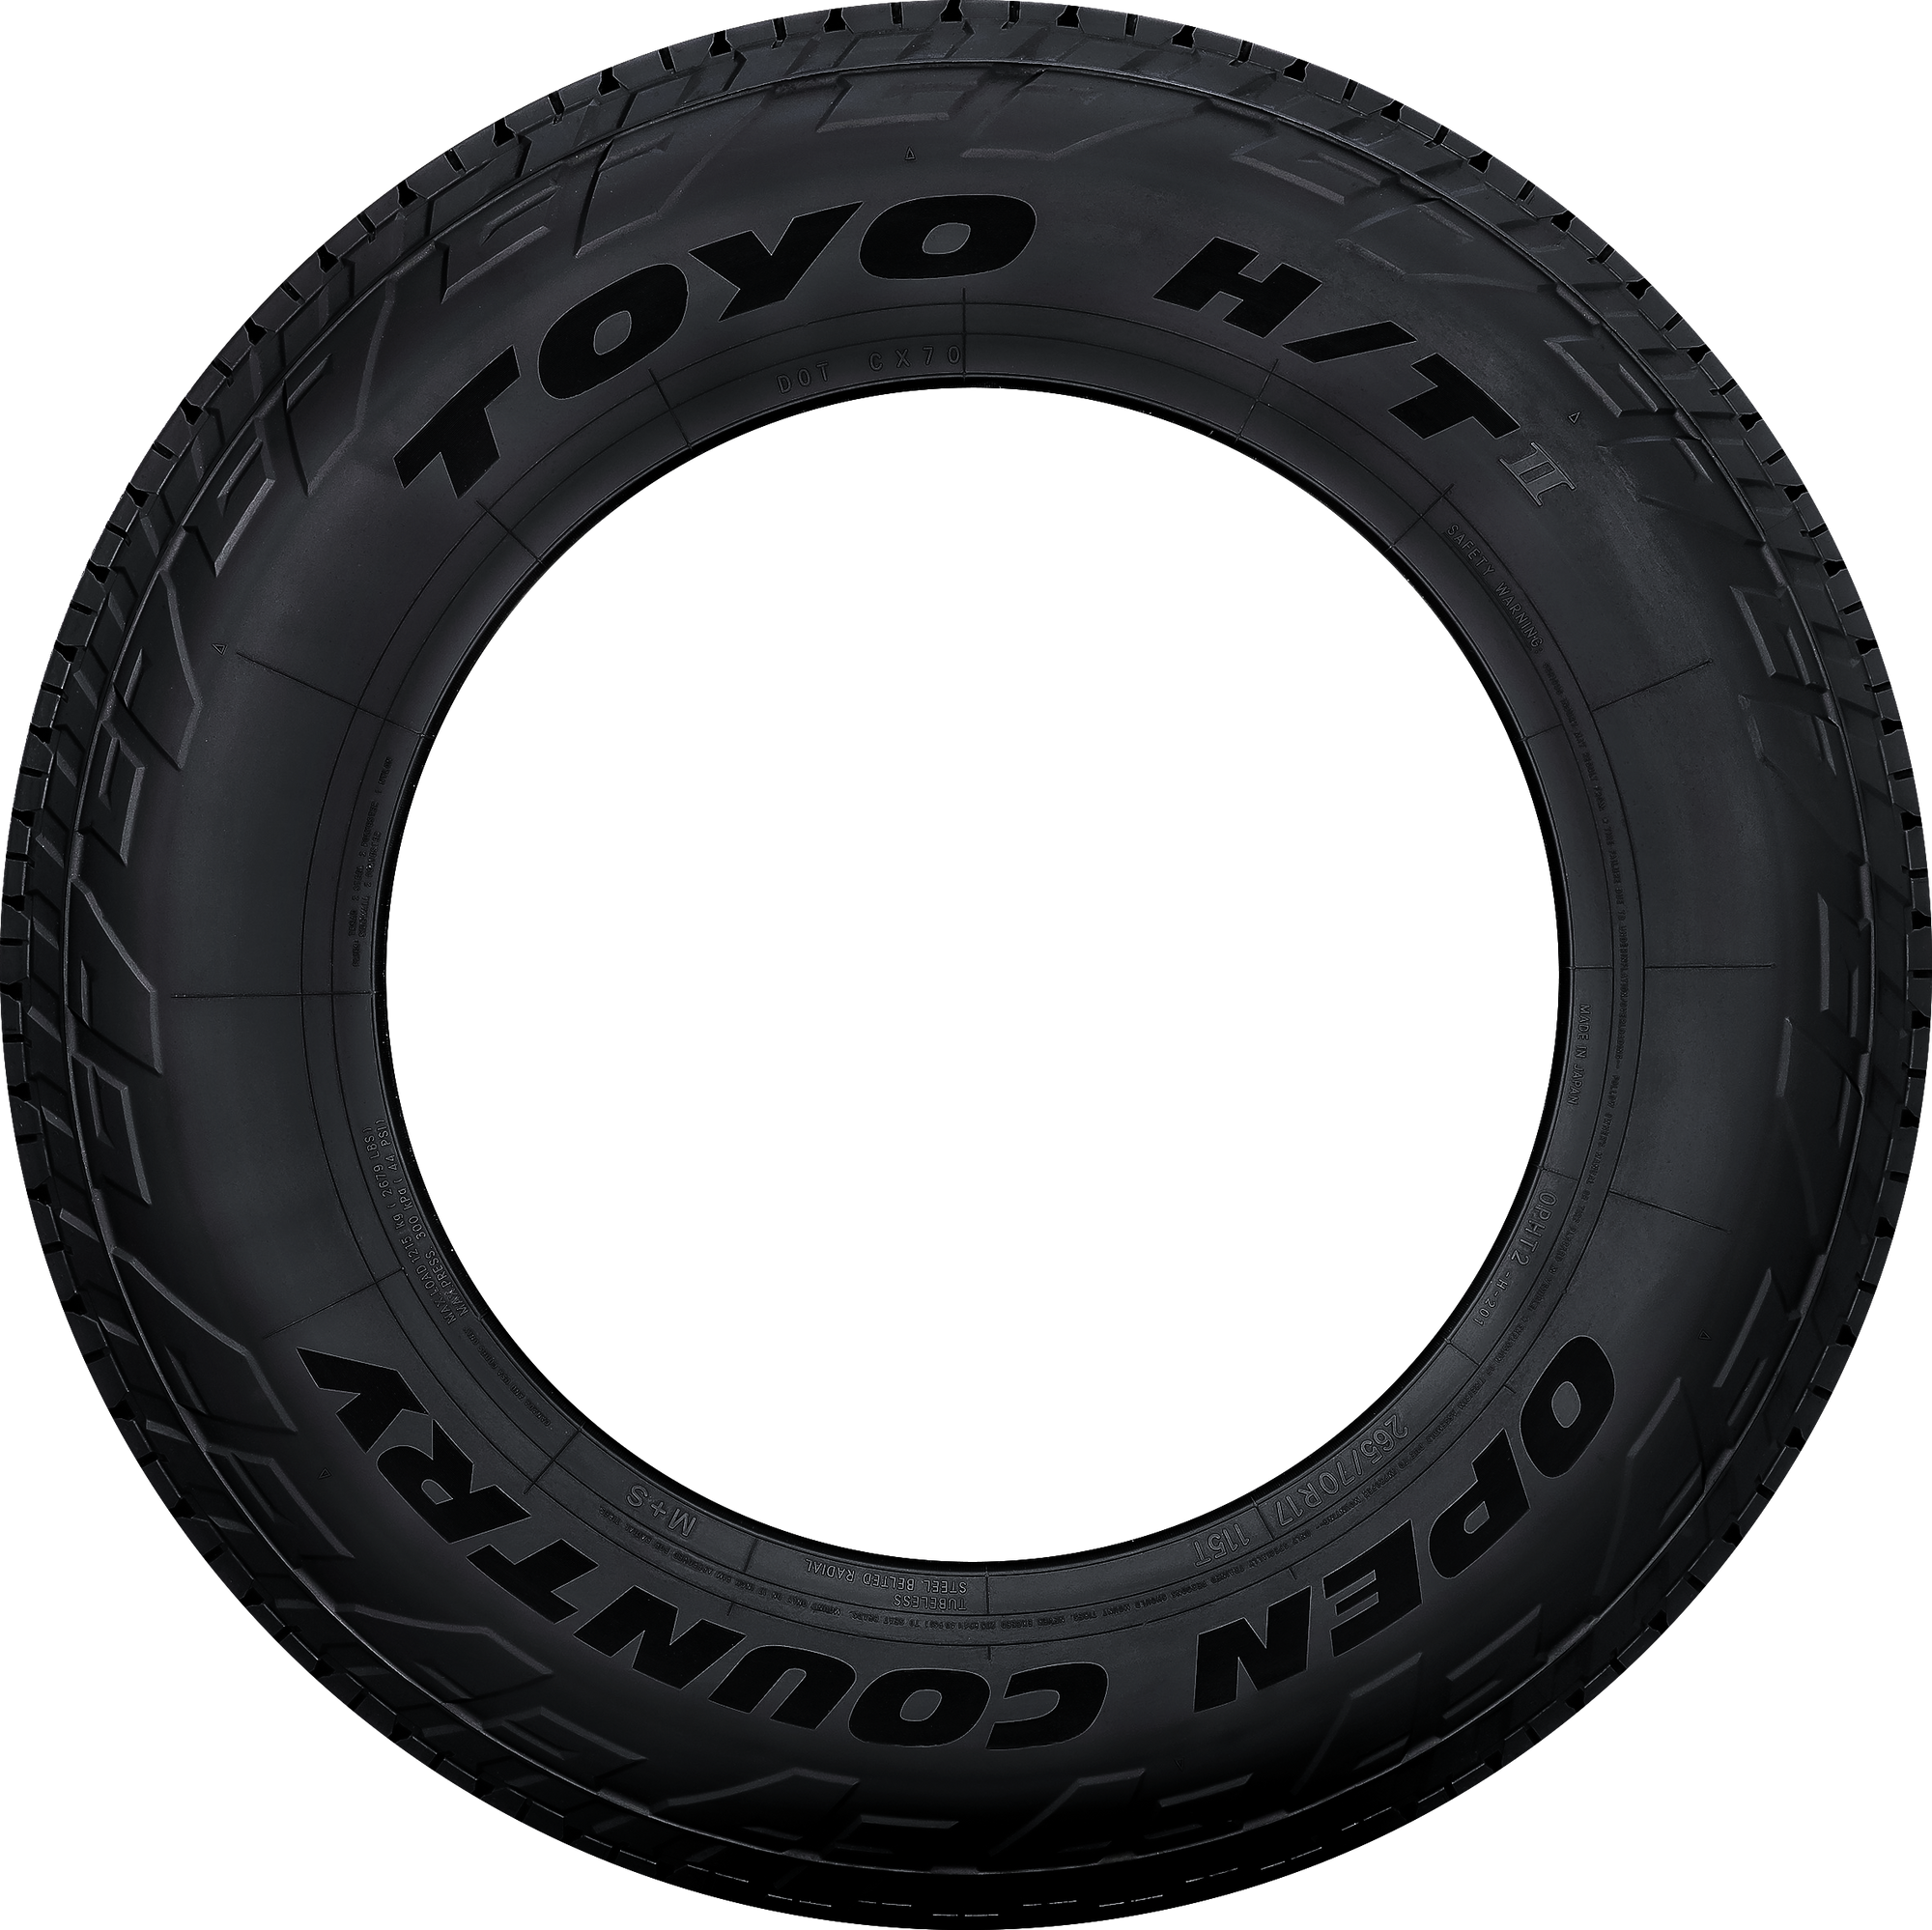 Toyo Open Country H/T II 235/60R18